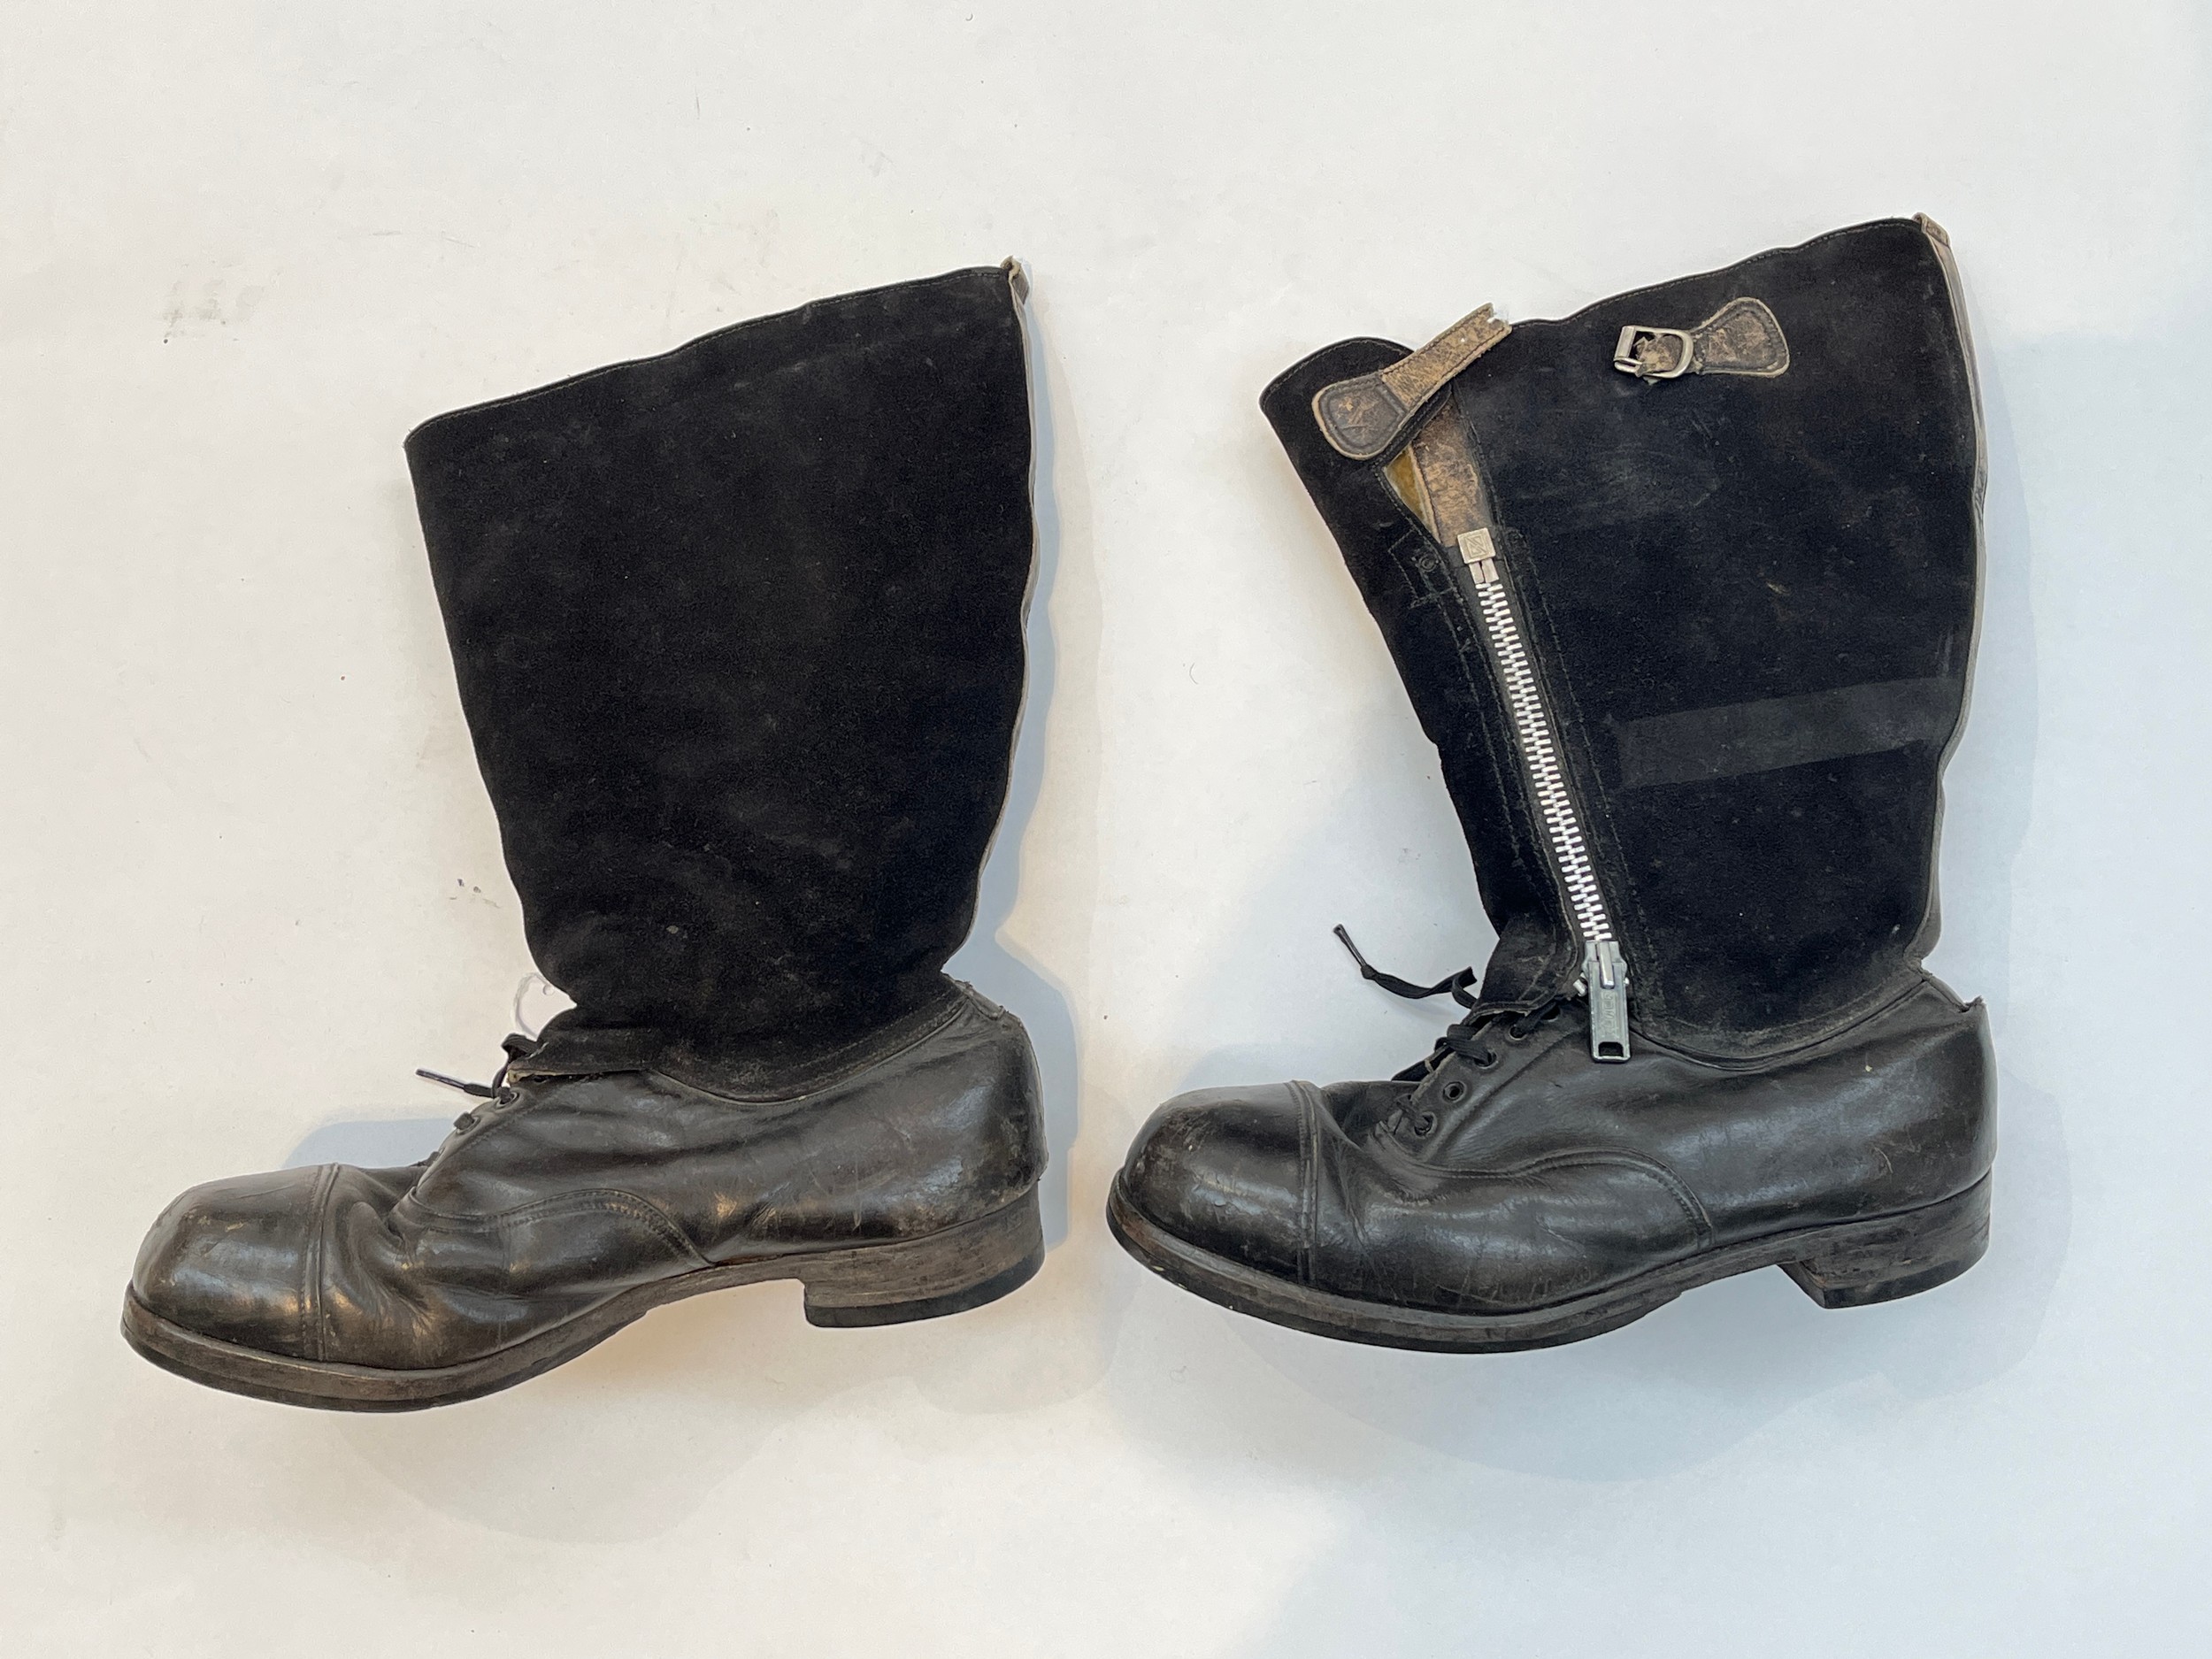 A pair of WWII British RAF flying boots “escape boots”, black leather and suede, the lower shoe